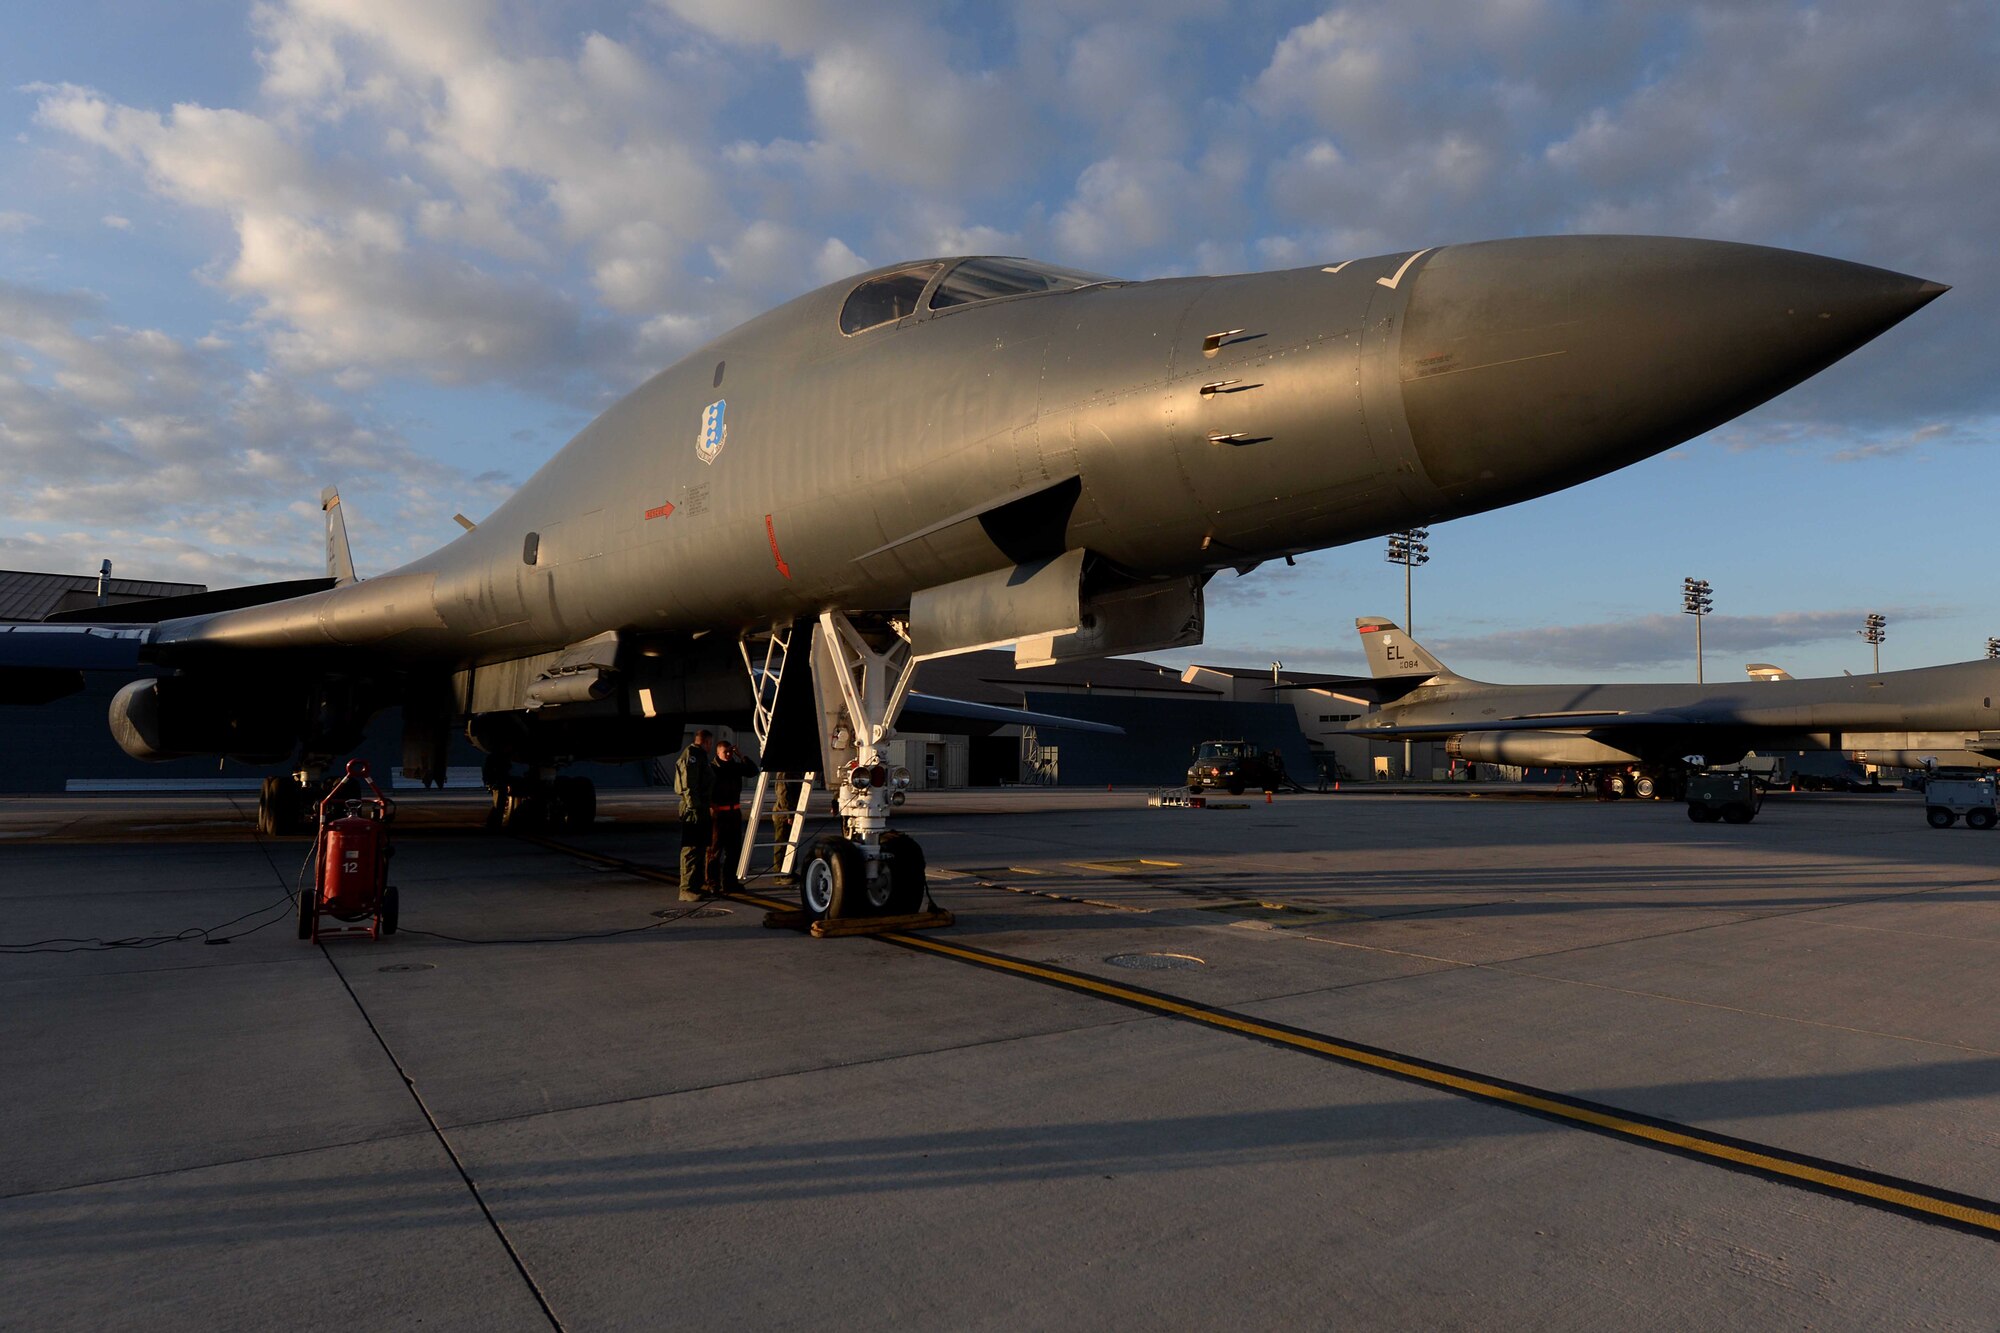 Aviators and maintainers perform final checks on a B-1B Lancer, May 12, 2014 on the flightline at Ellsworth Air Force Base, S.D. The 28th Bomb Wing generated two B-1s in support of a round trip, non-stop training mission from Ellsworth to employ munitions on a range near Guam, demonstrating the long-range, precision strike capabilities of the aircraft. (U.S. Air Force photo by Airman 1st Class Rebecca Imwalle/Released) 